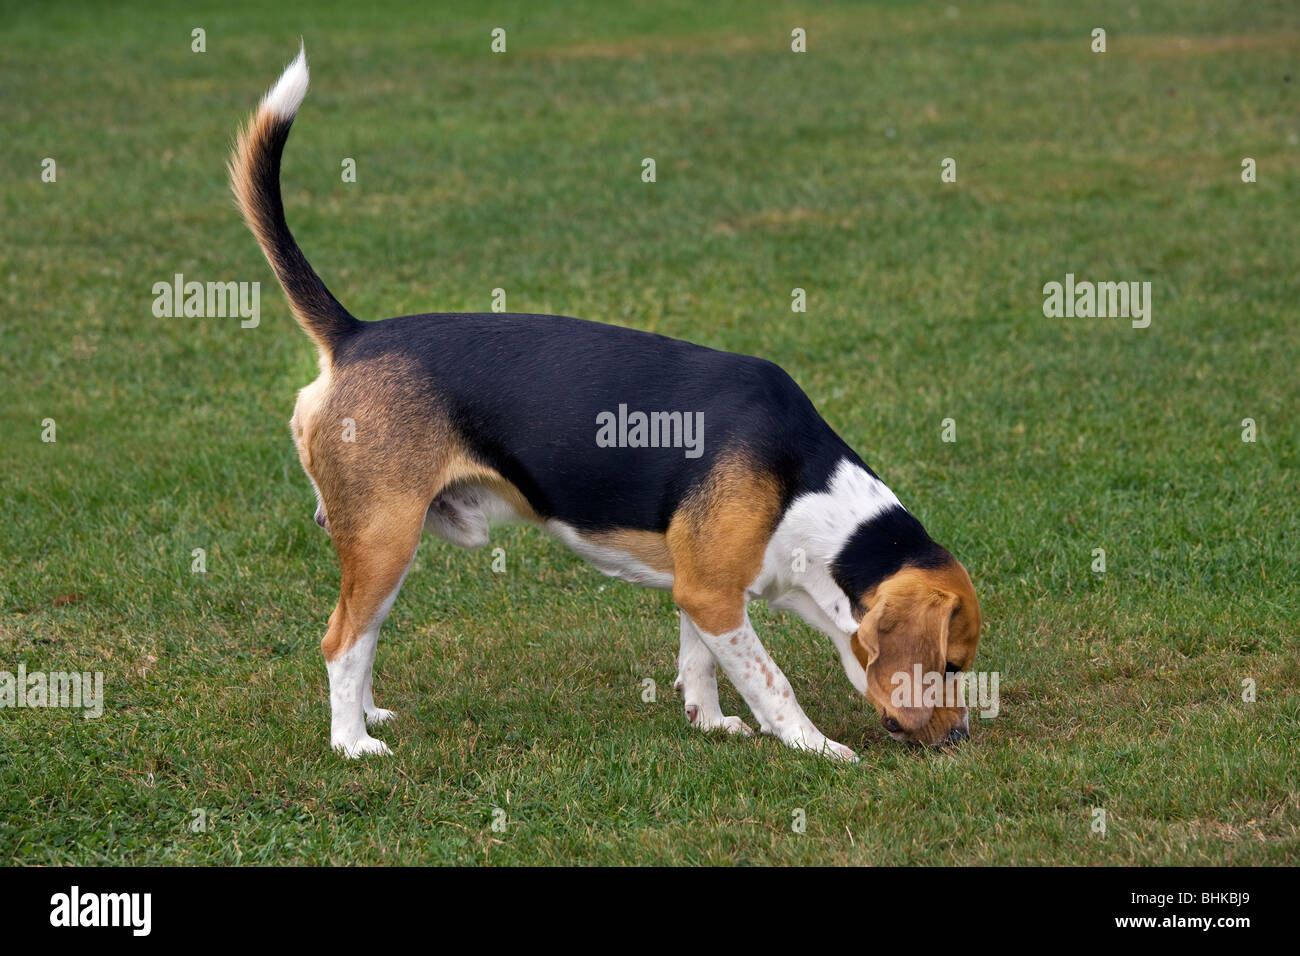 Beagle dog (Canis lupus familiaris) sniffing in garden Stock Photo